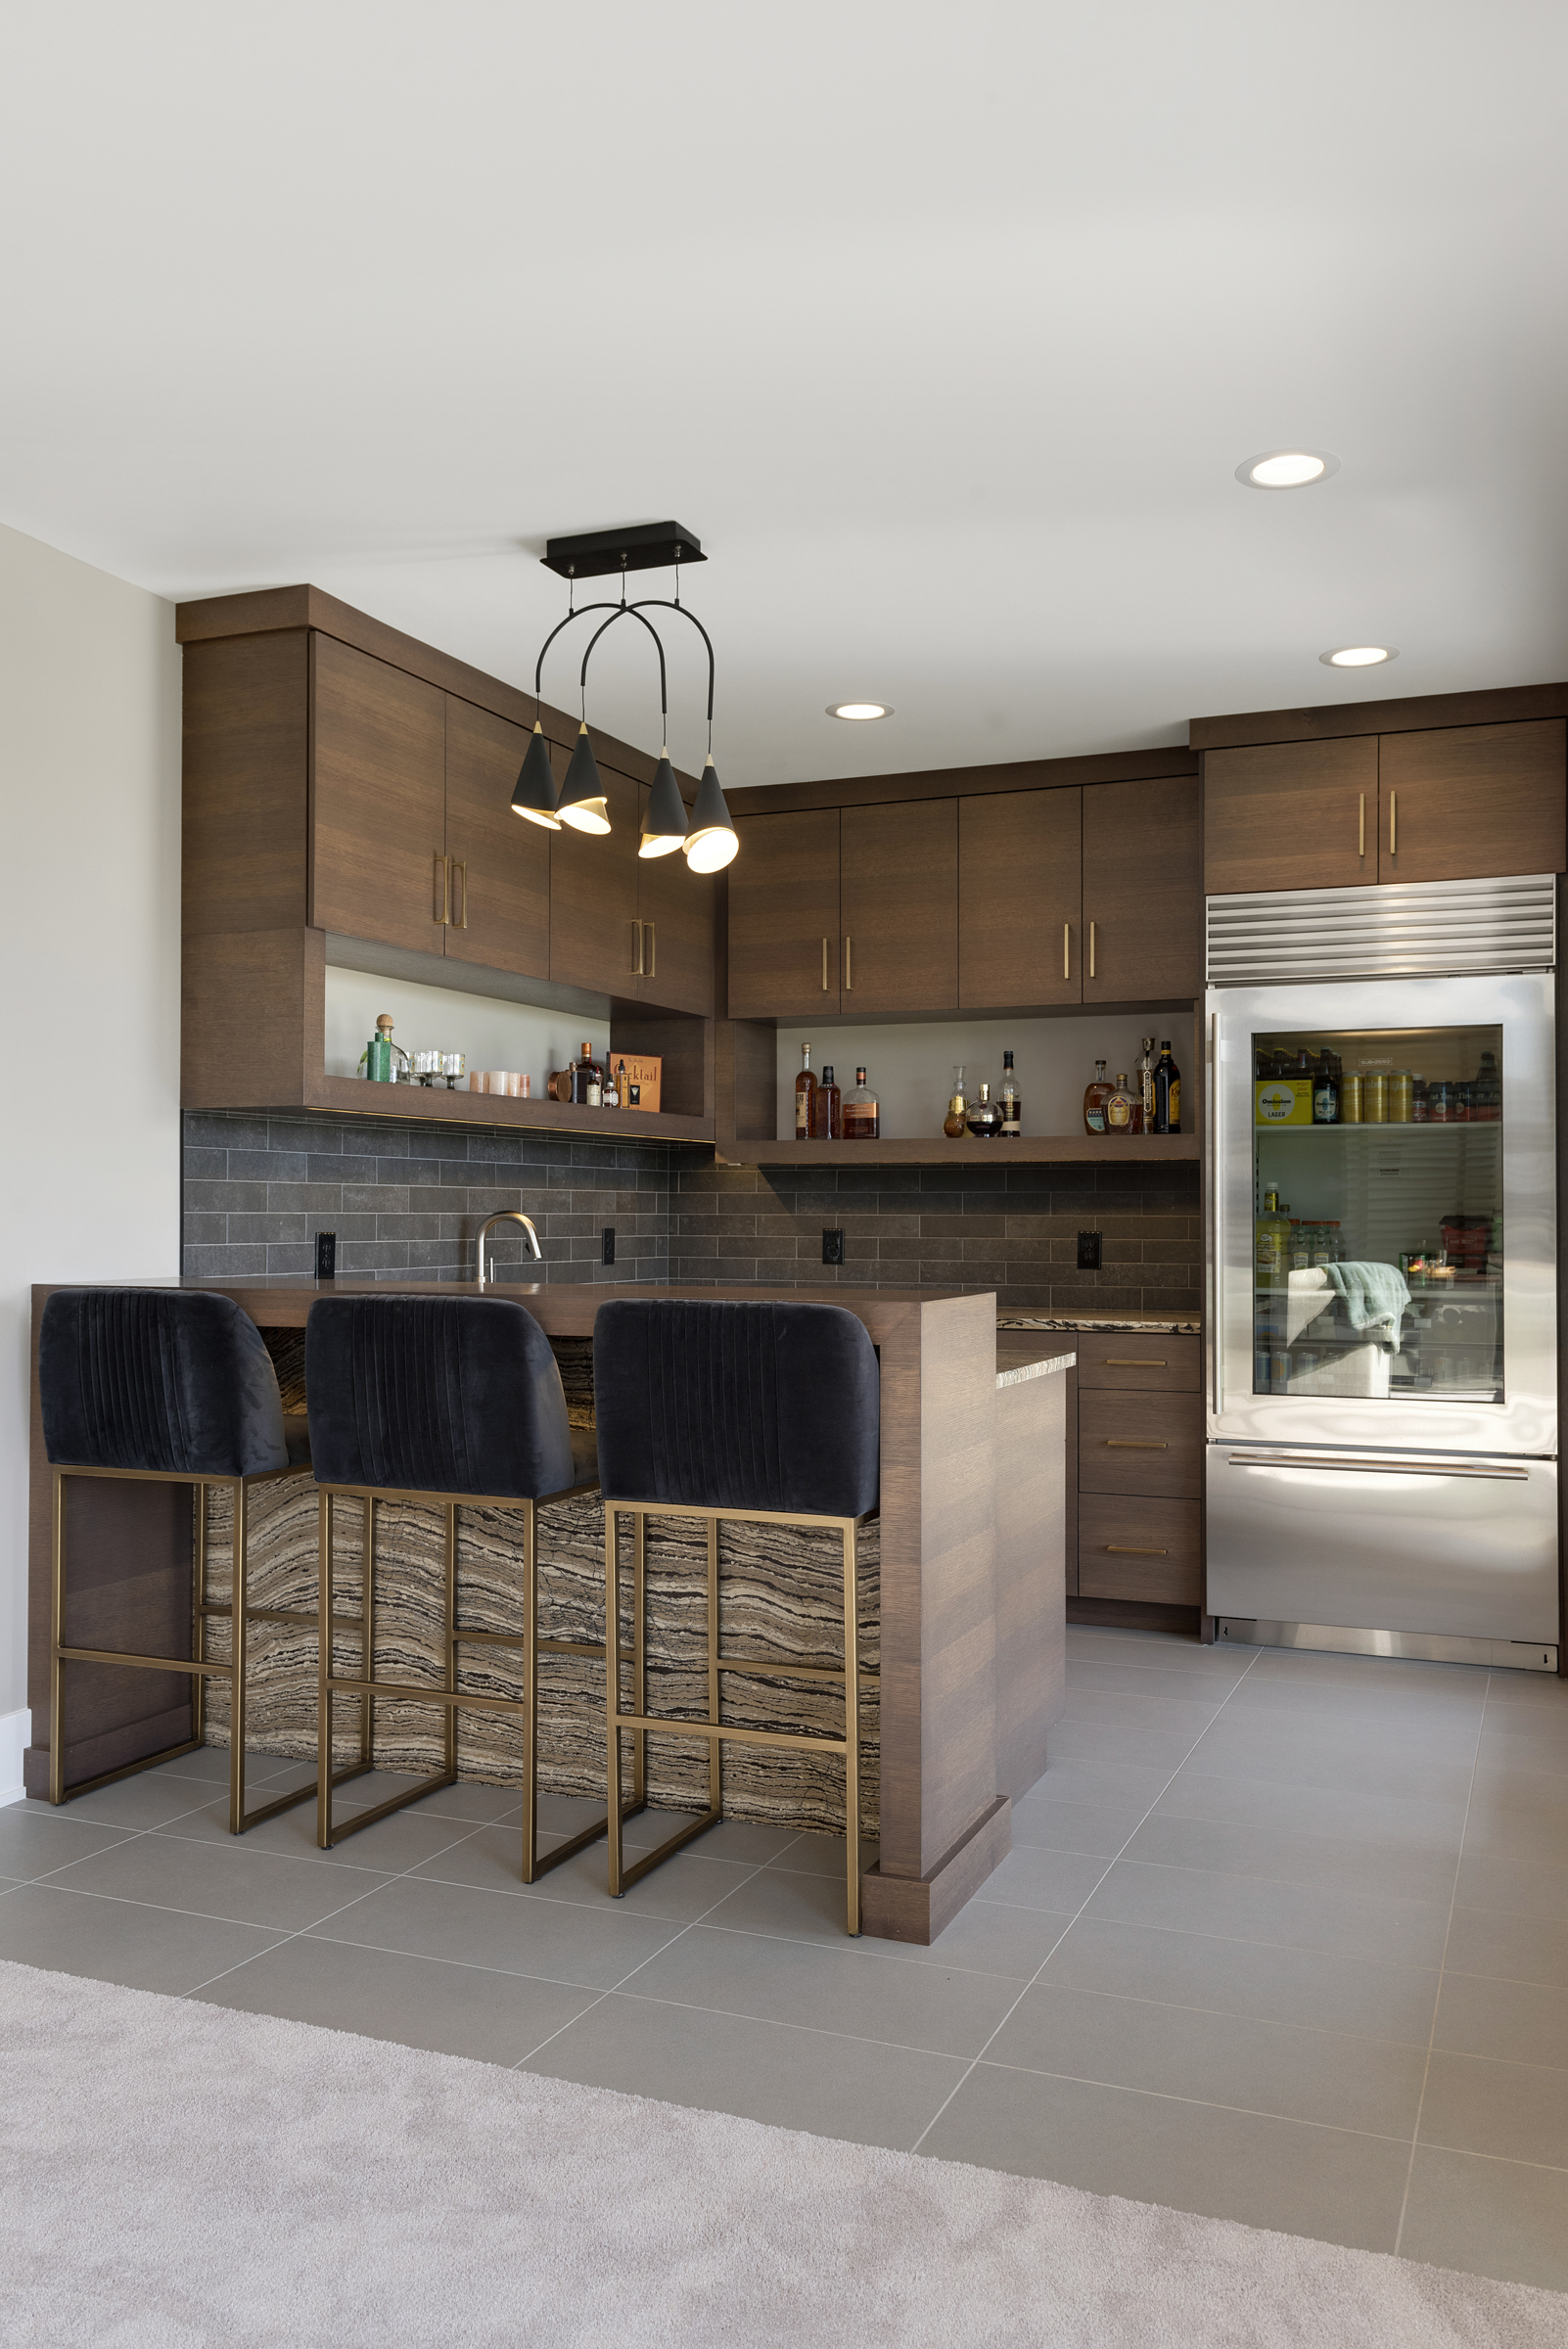 A prairie transitional custom home kitchen with stainless steel appliances and bar stools.